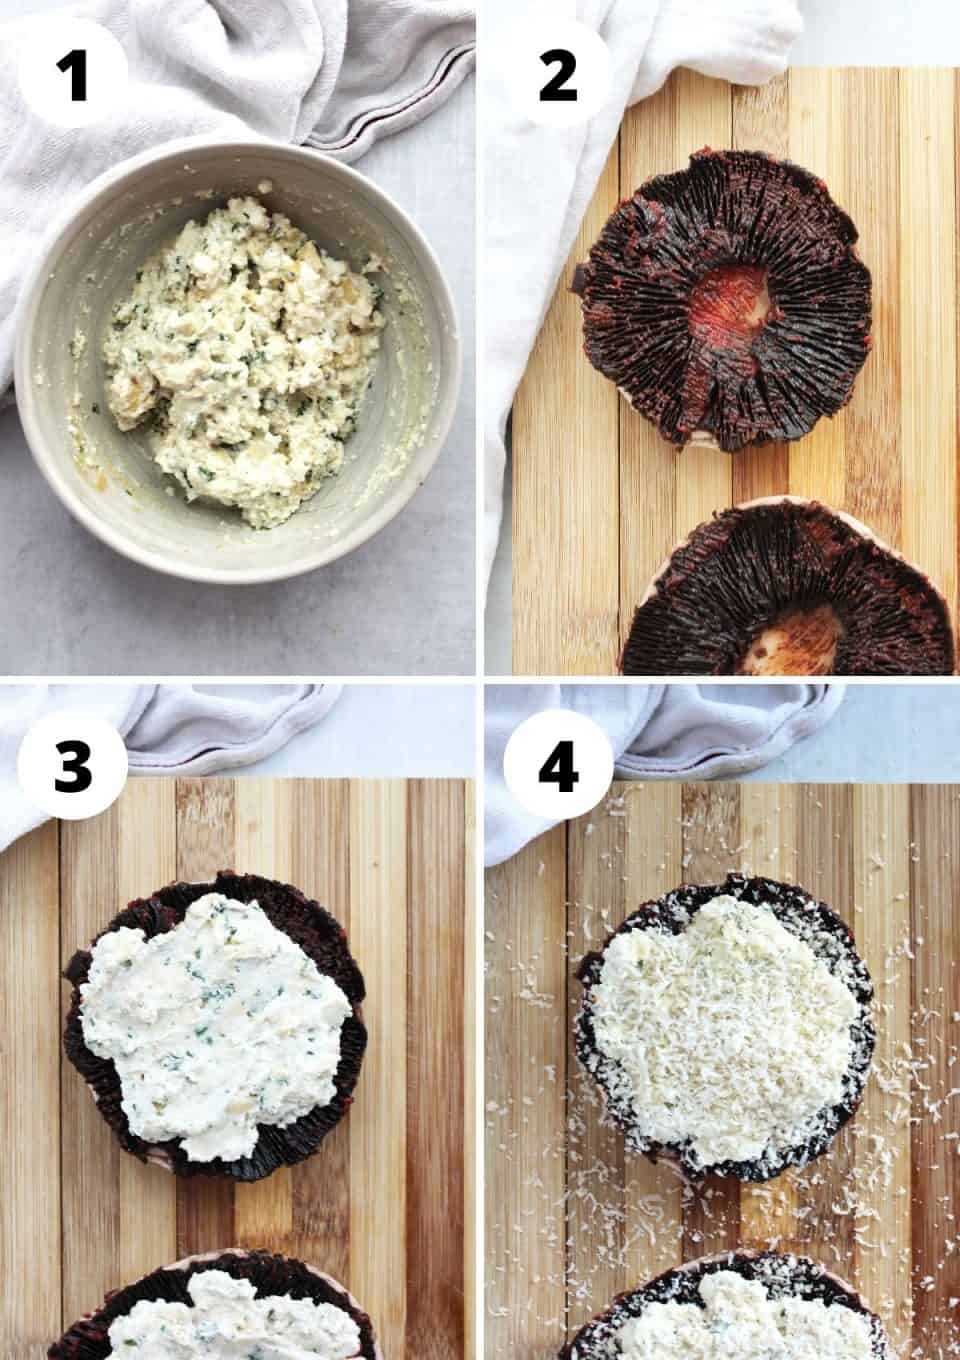 Four step by step photos to show how to make the filling and stuff the mushrooms.